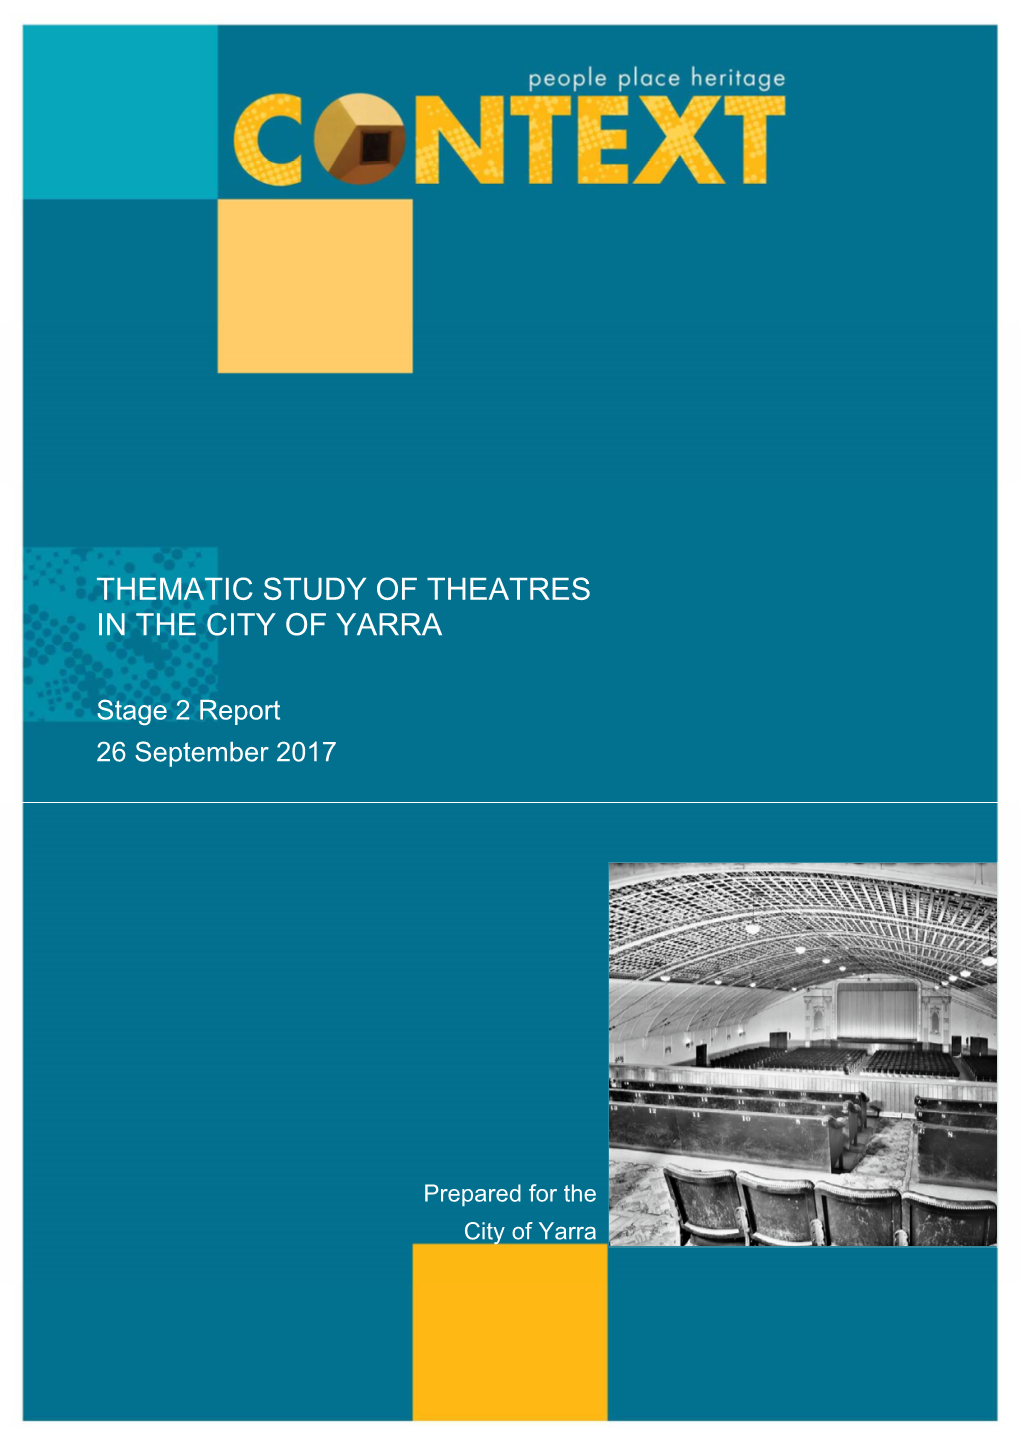 Thematic Study of Theatres in the City of Yarra